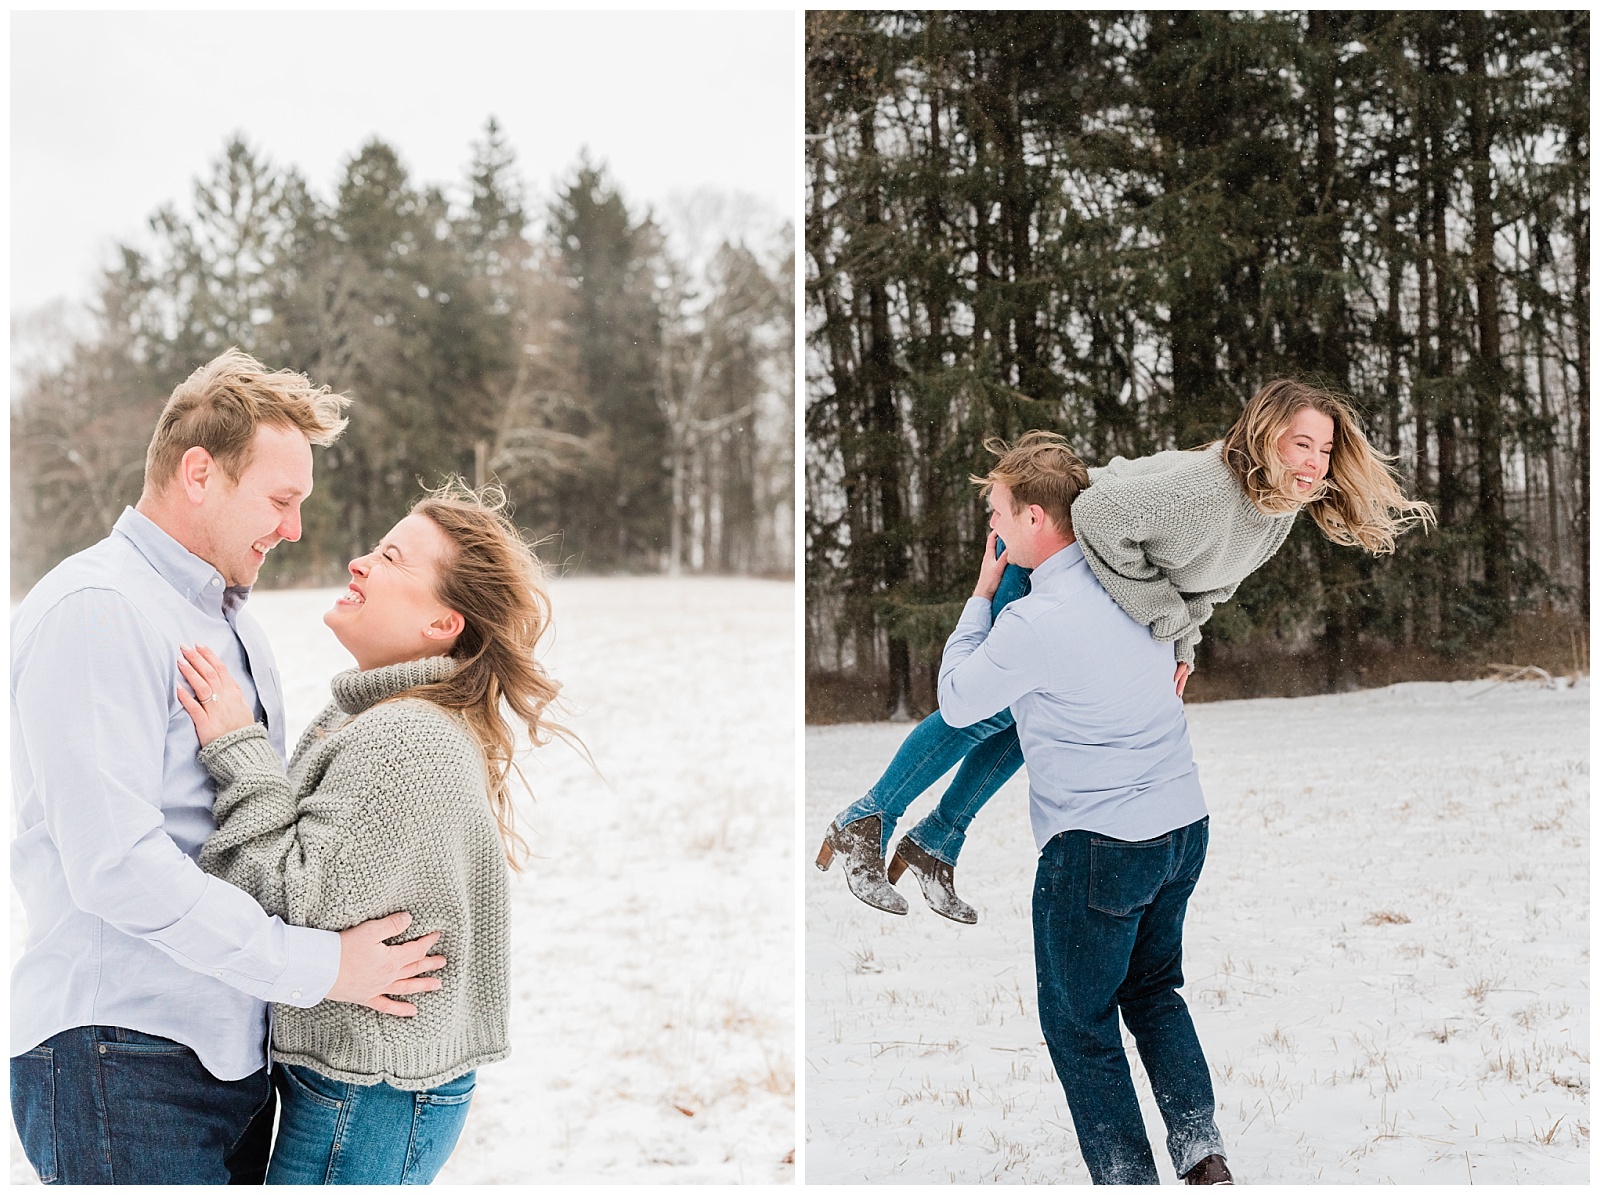 New Jersey Engagement Session, Snowy, Winter, Cozy, Session, Wedding Photographer, Cross Estate Gardens, Snow, Wintry